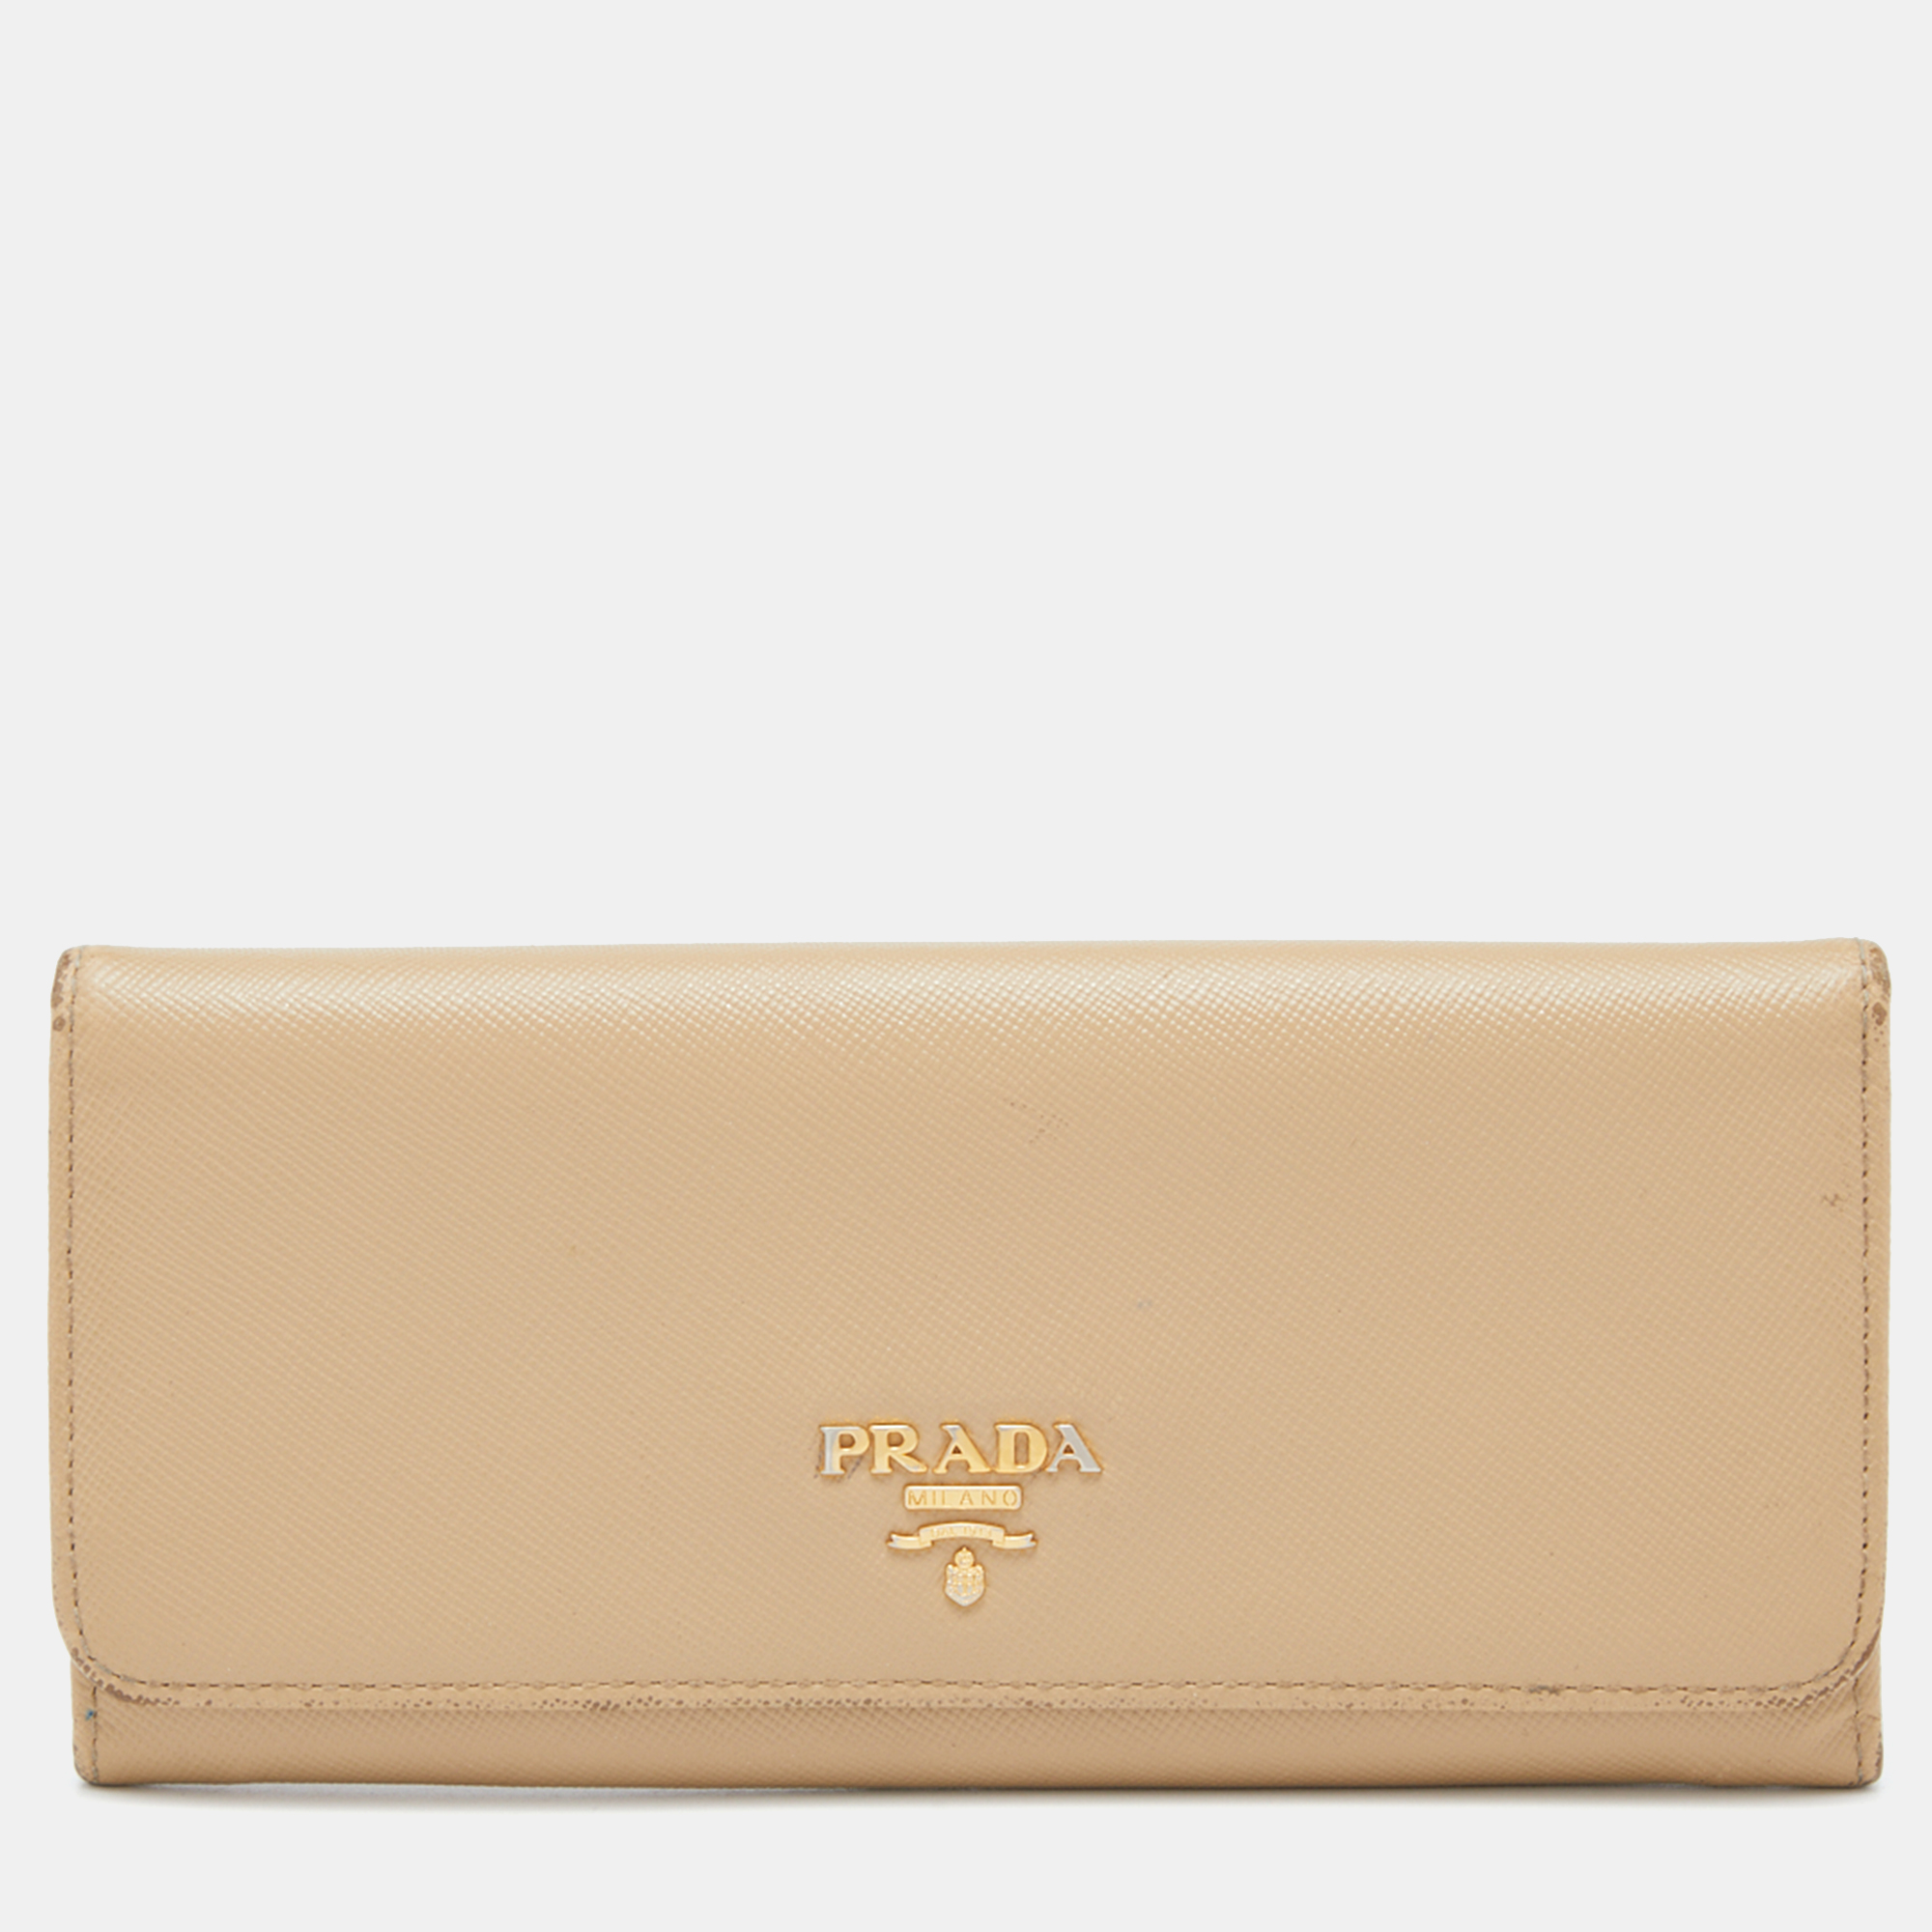 A beautiful wallet for stylish women this branded wallet is perfect to be carried solo or inside your tote while you step out to run errands. It is a durable accessory.